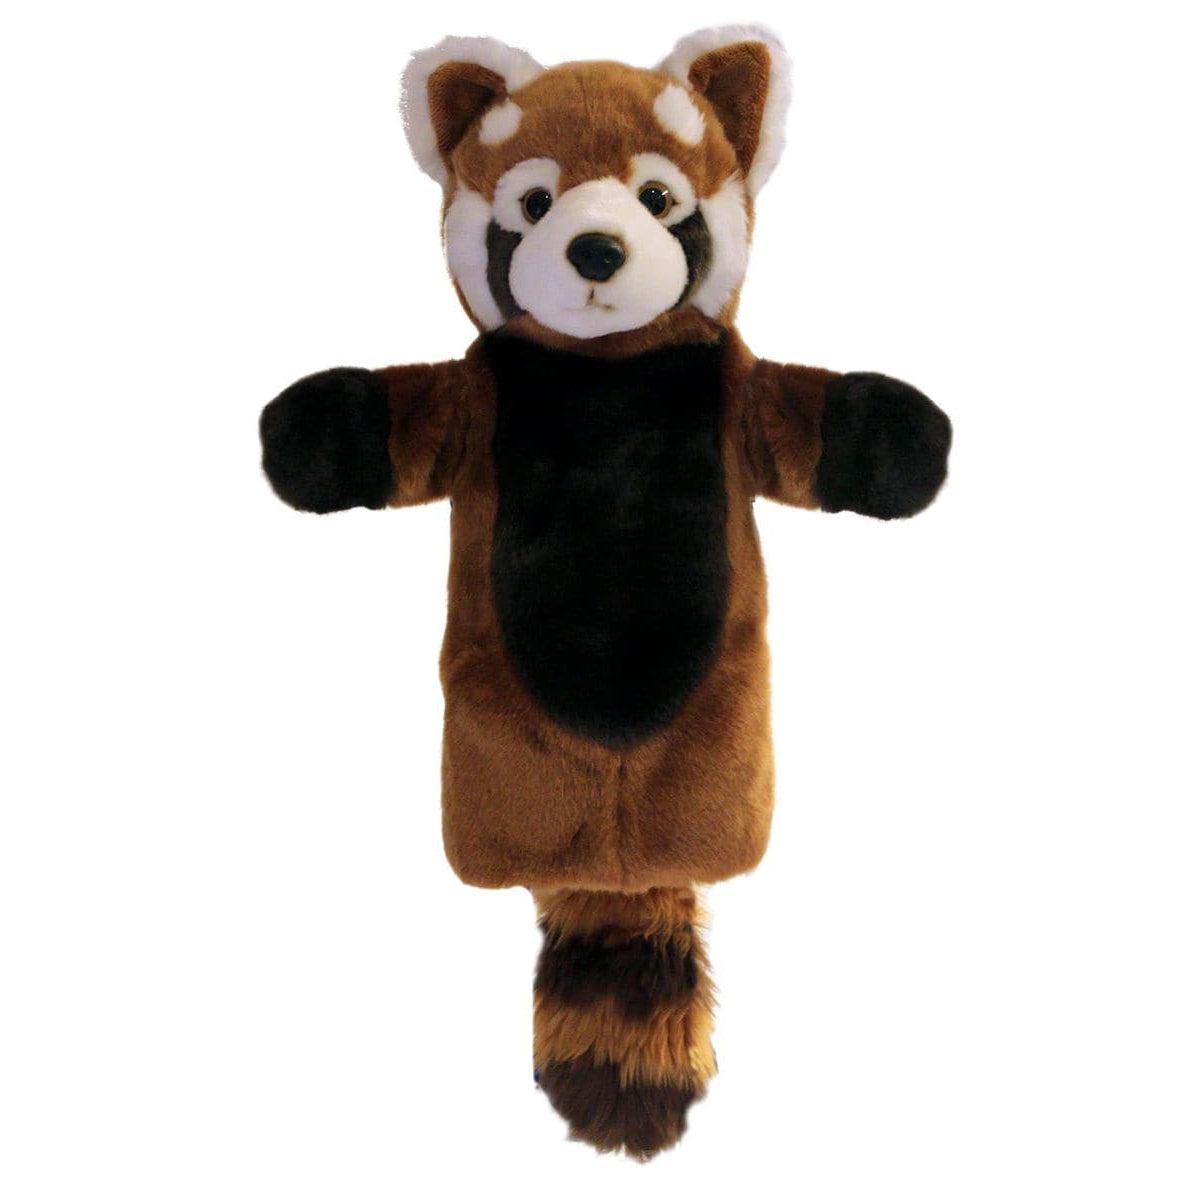 The Puppet Company-Long Sleeved Glove Puppets - Red Panda-PC006054-Legacy Toys